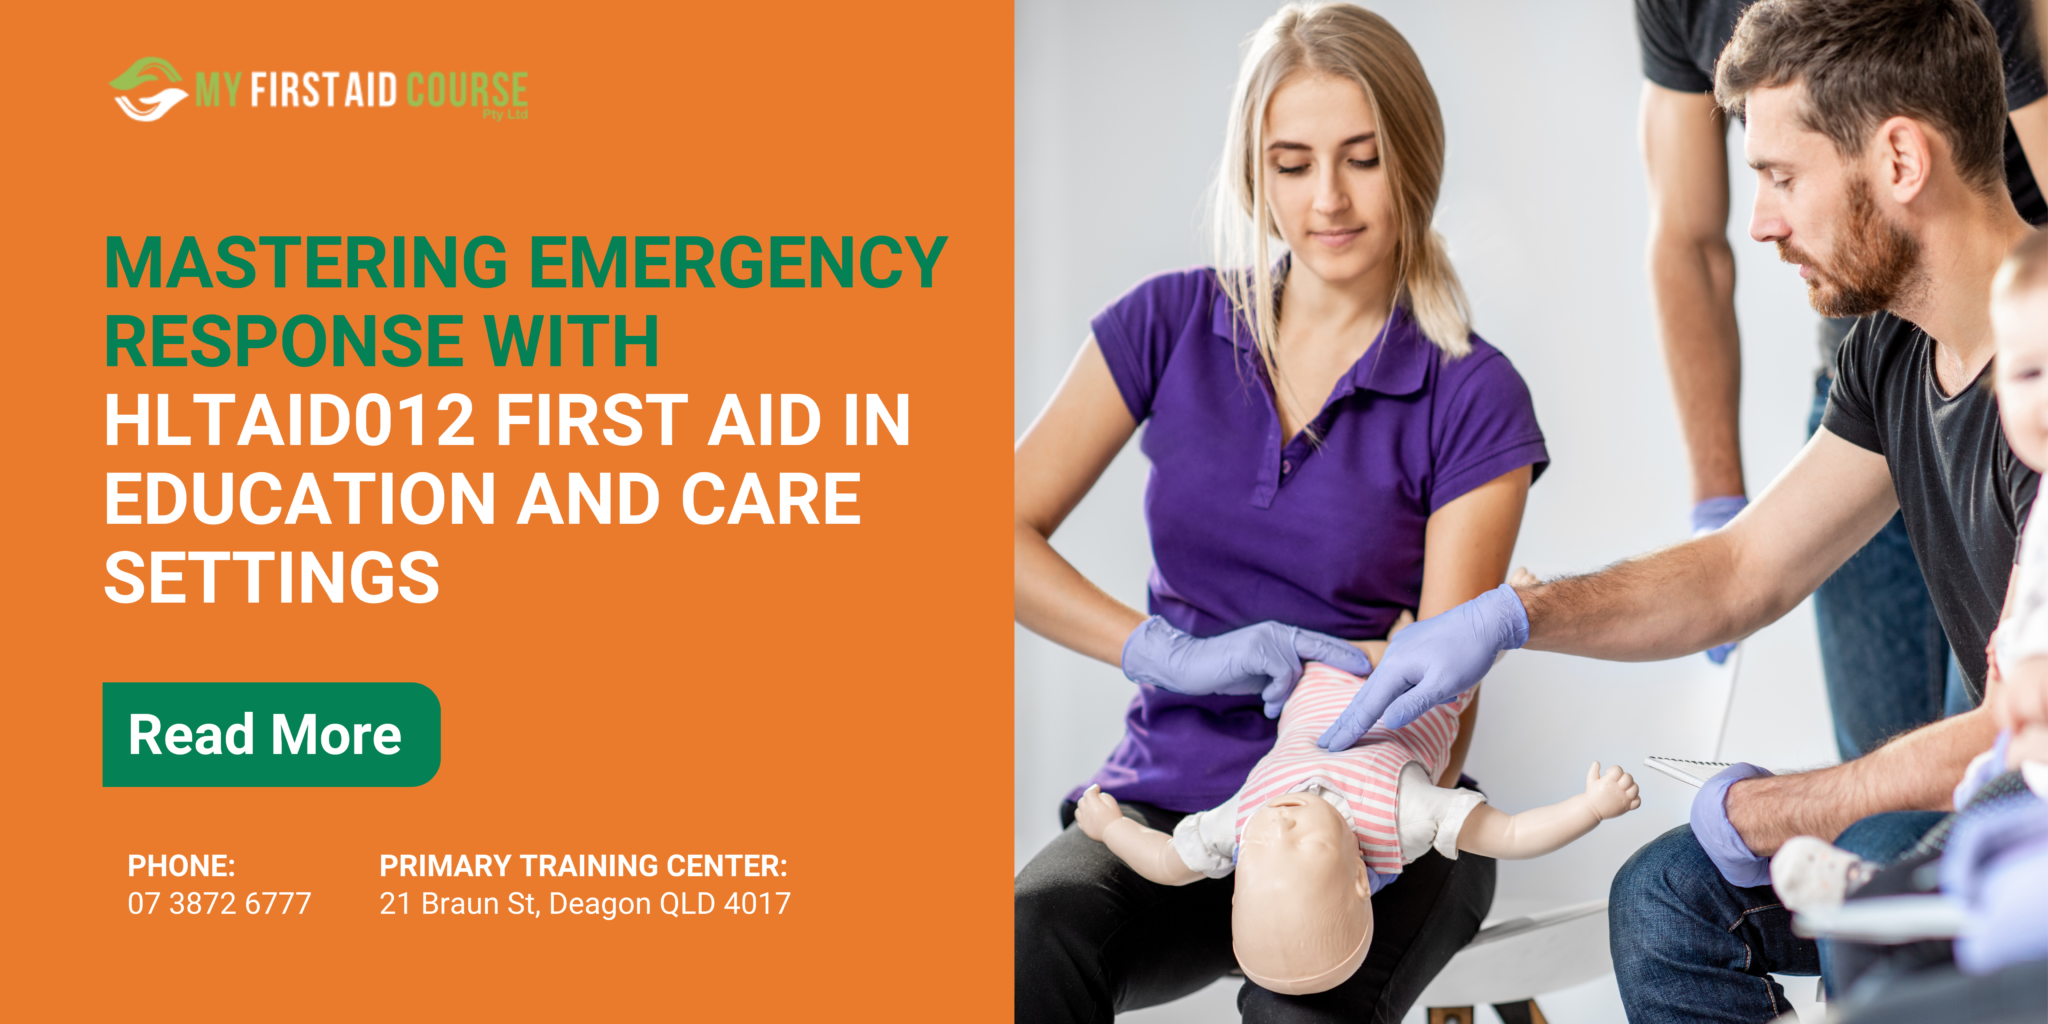 You are currently viewing Mastering Emergency Response with HLTAID012 First Aid in Education and Care Settings